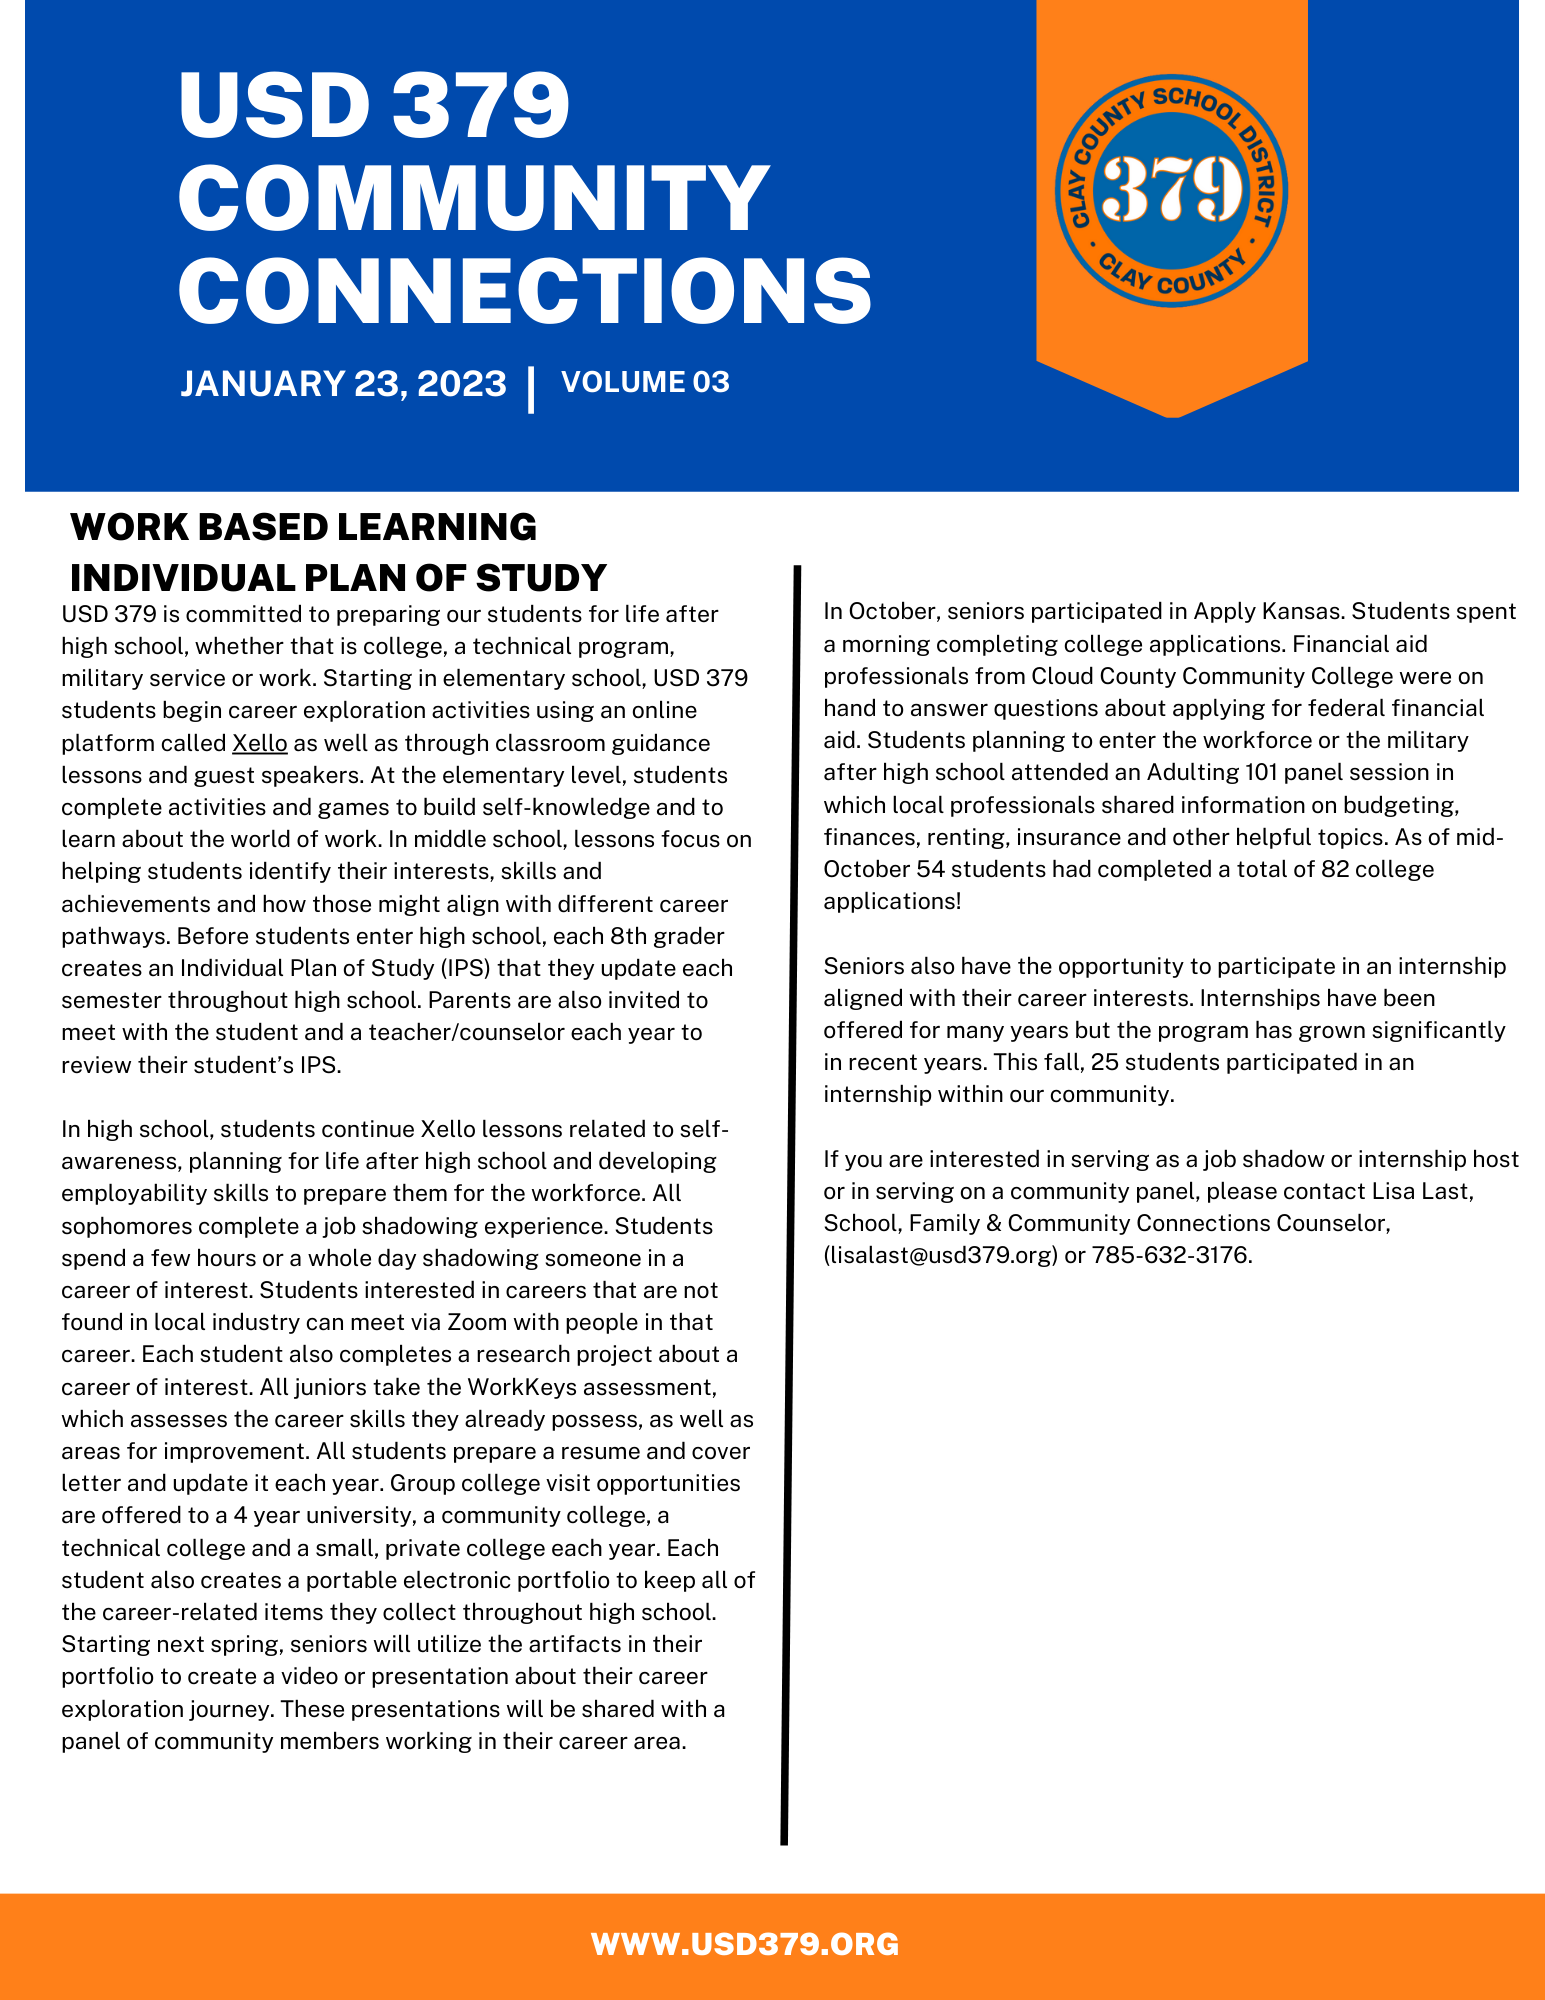 Work Based Learning and Individual Plan of Study